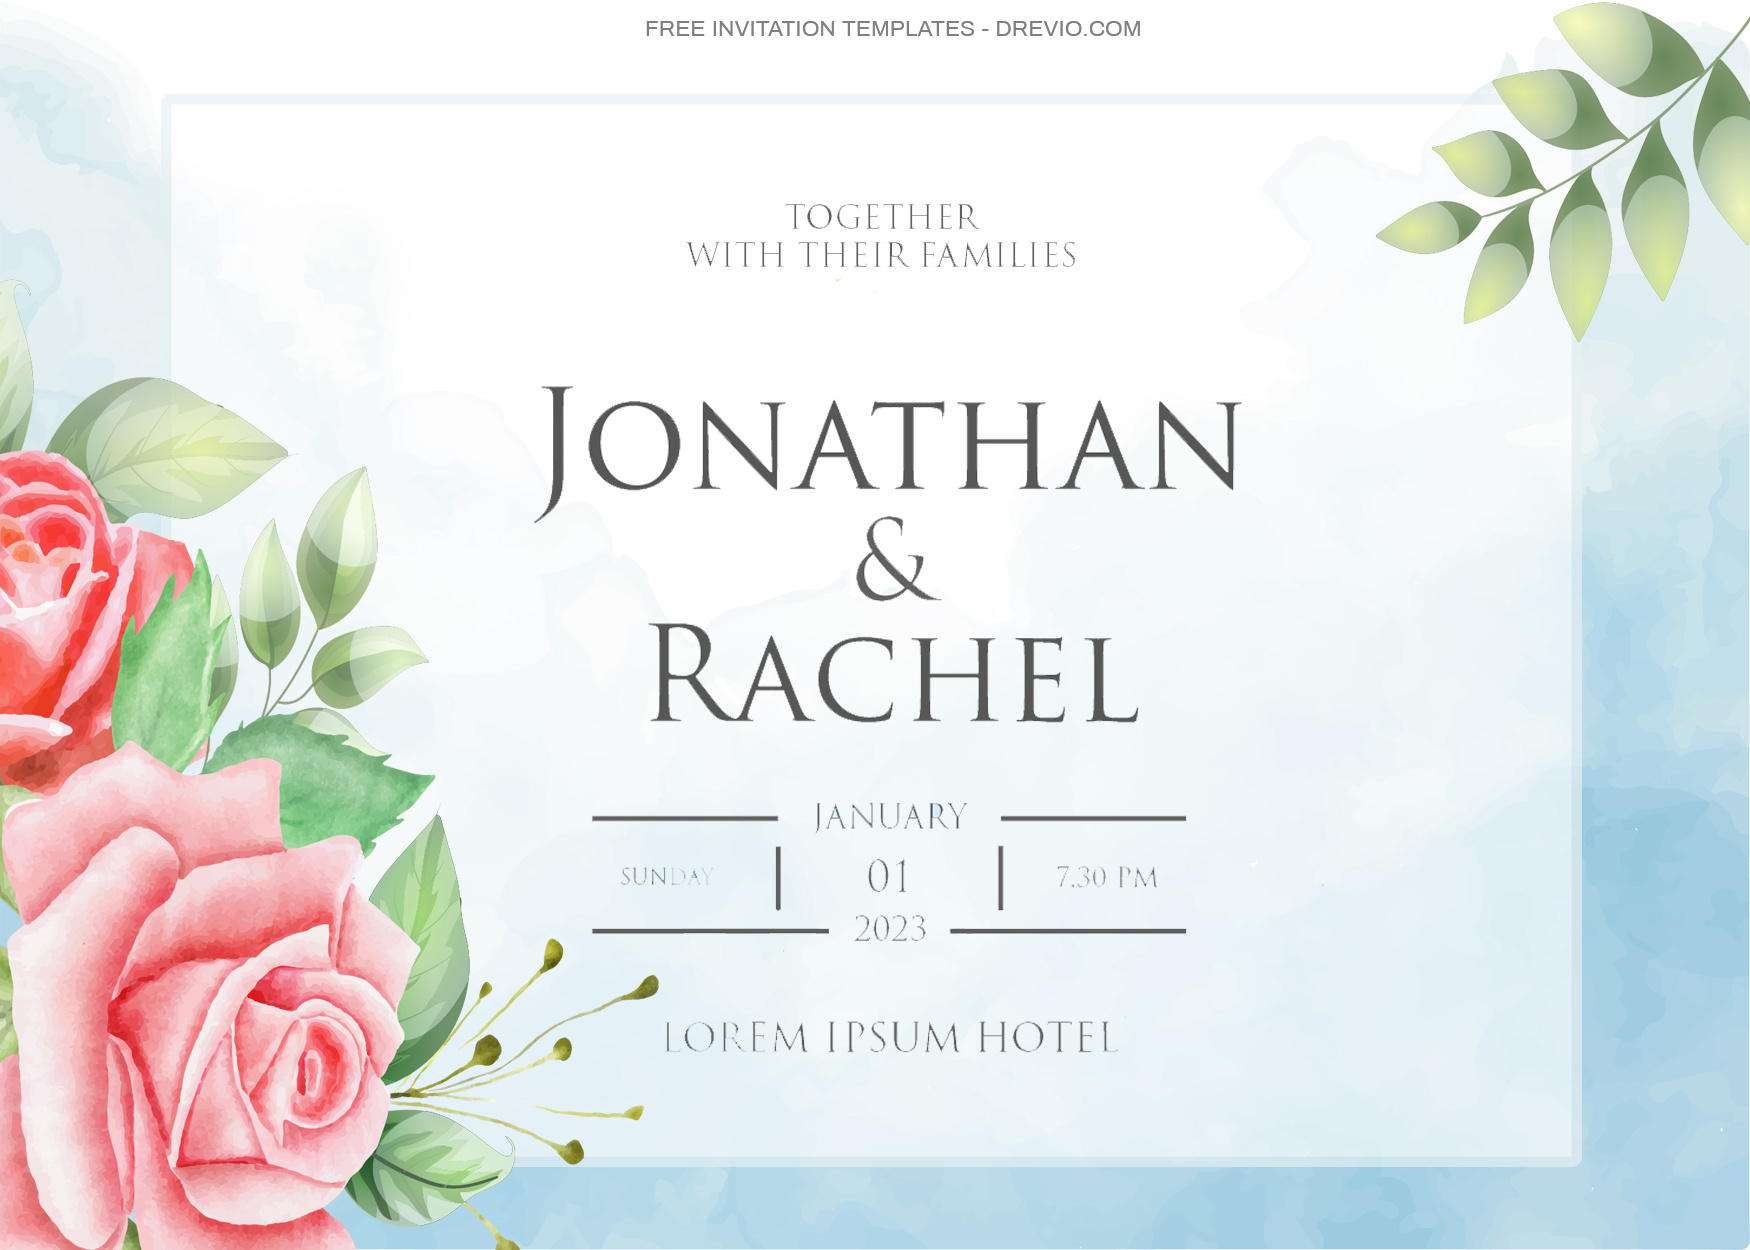 10+ Blue Sky With Roses Floral Invitation Template